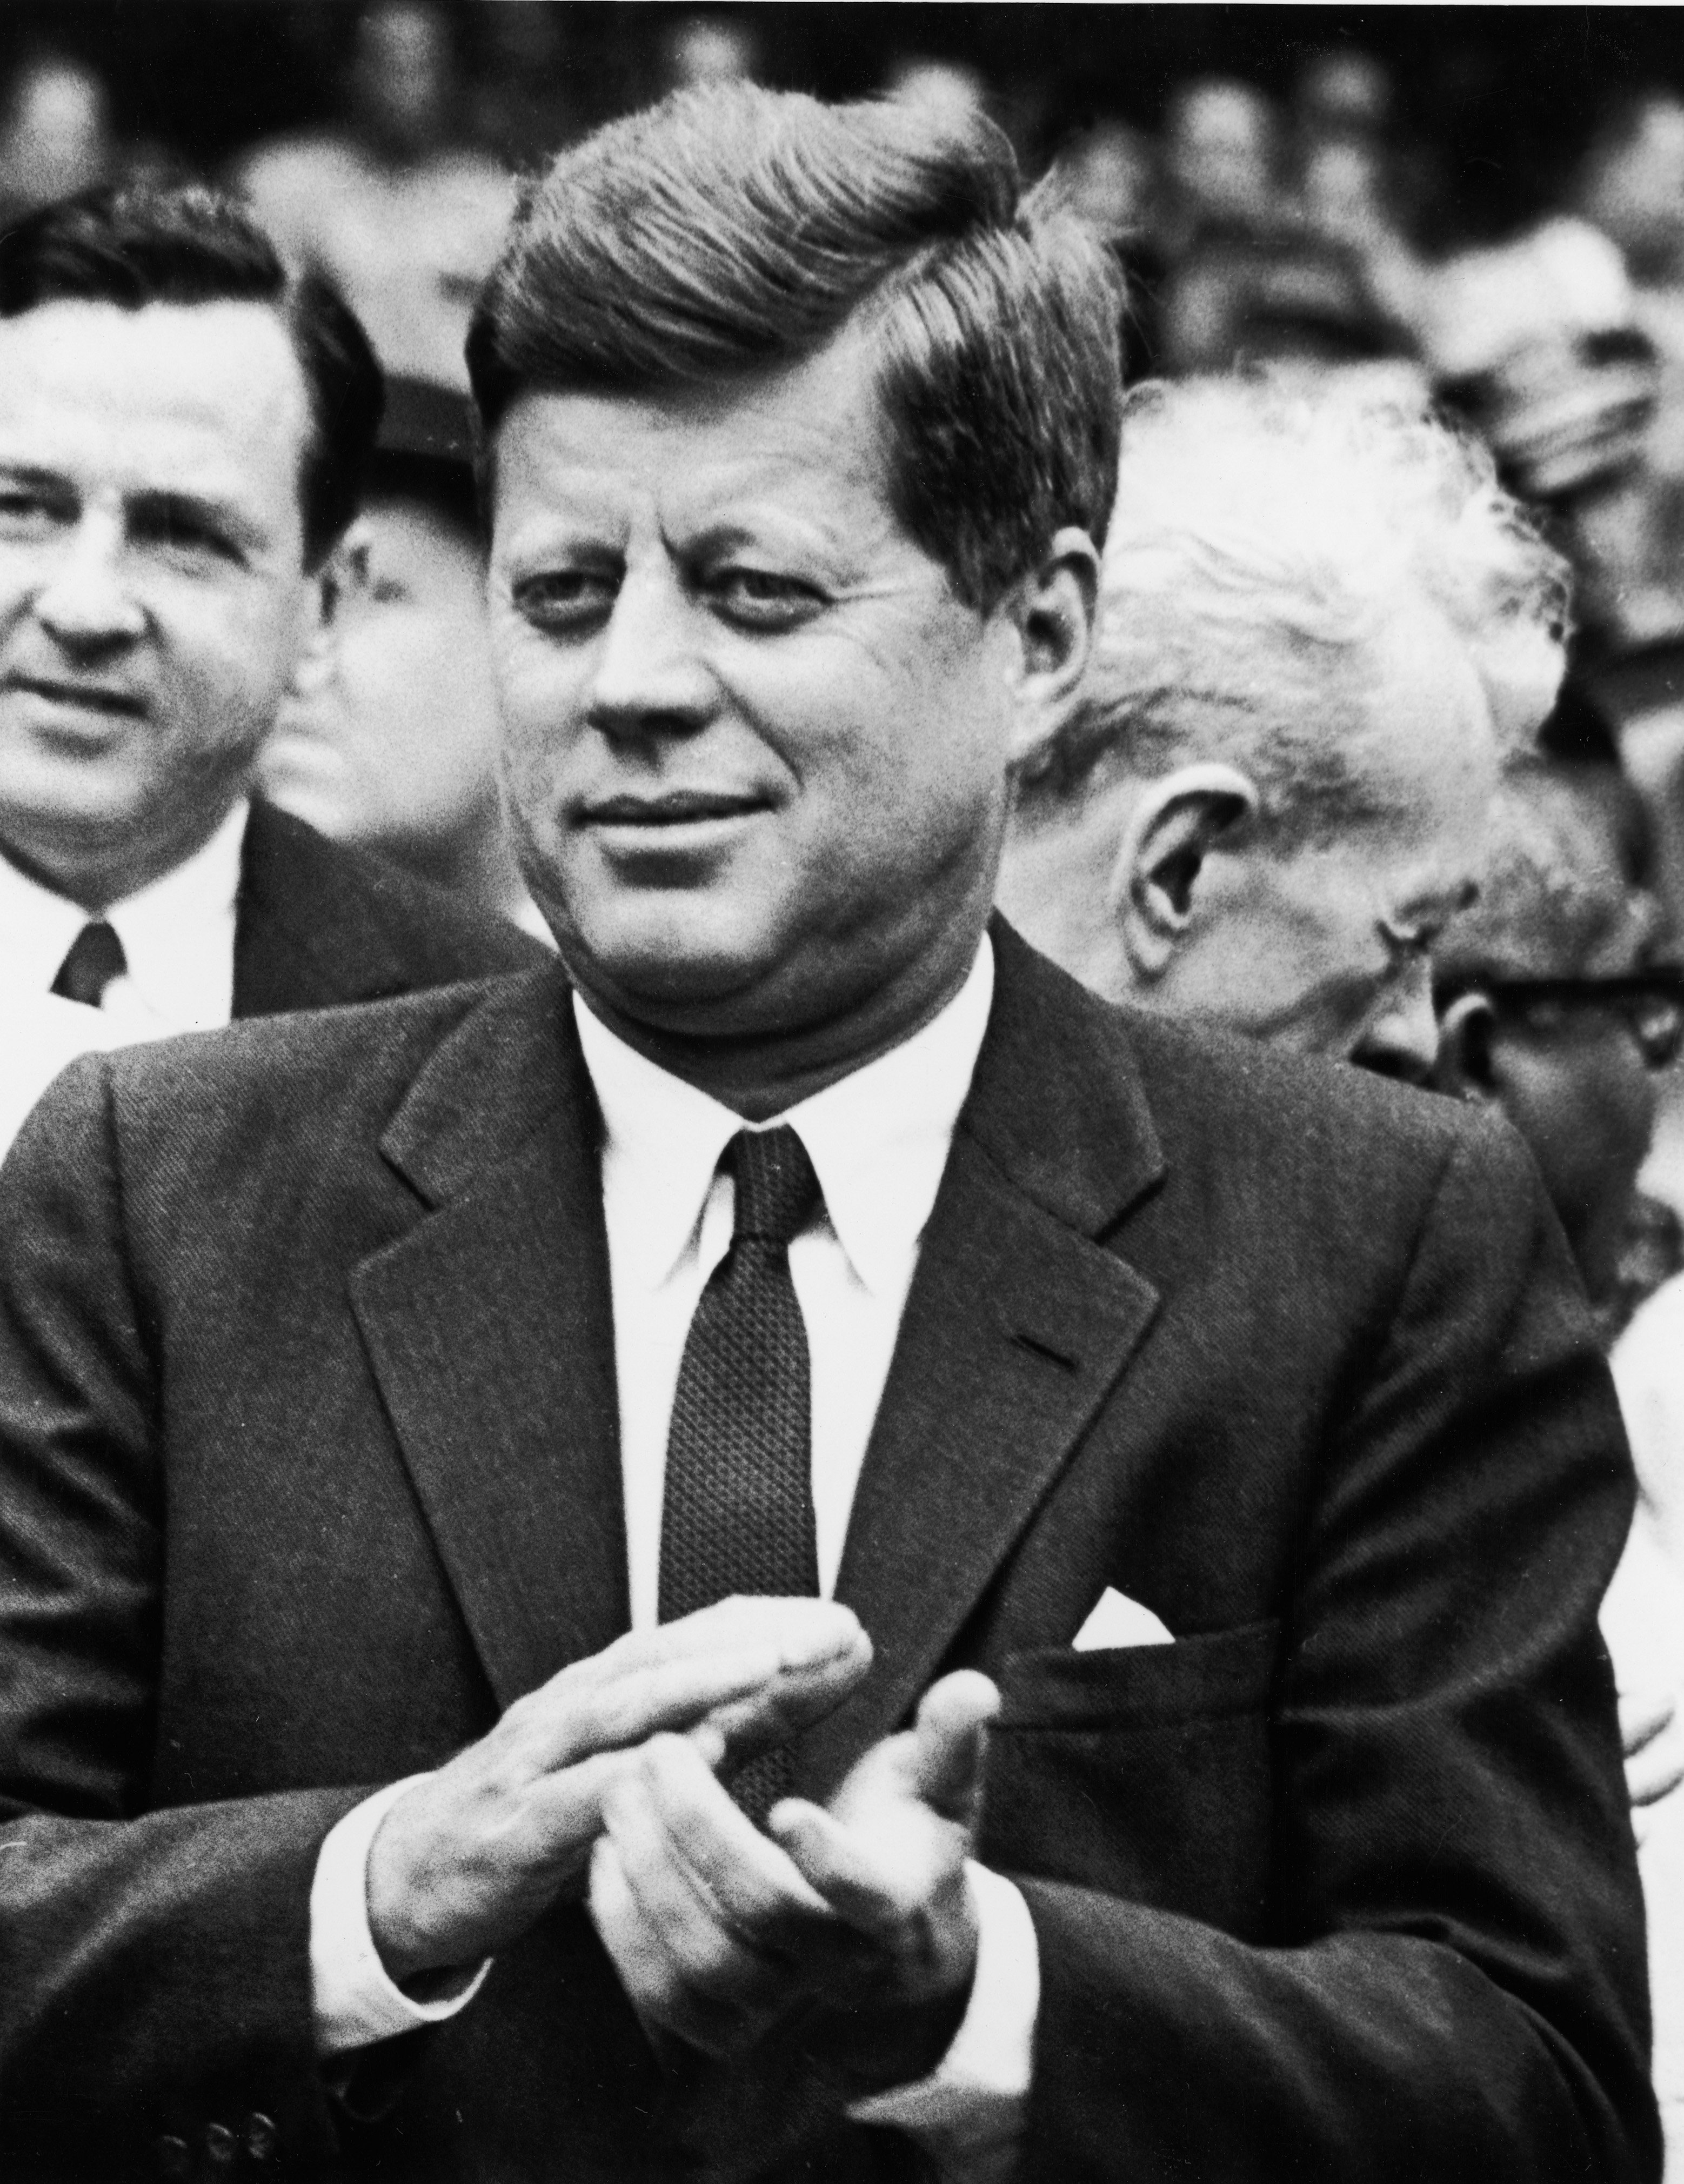 Former President John F Kennedy attends makes an official public appearance | Photo: Getty Images